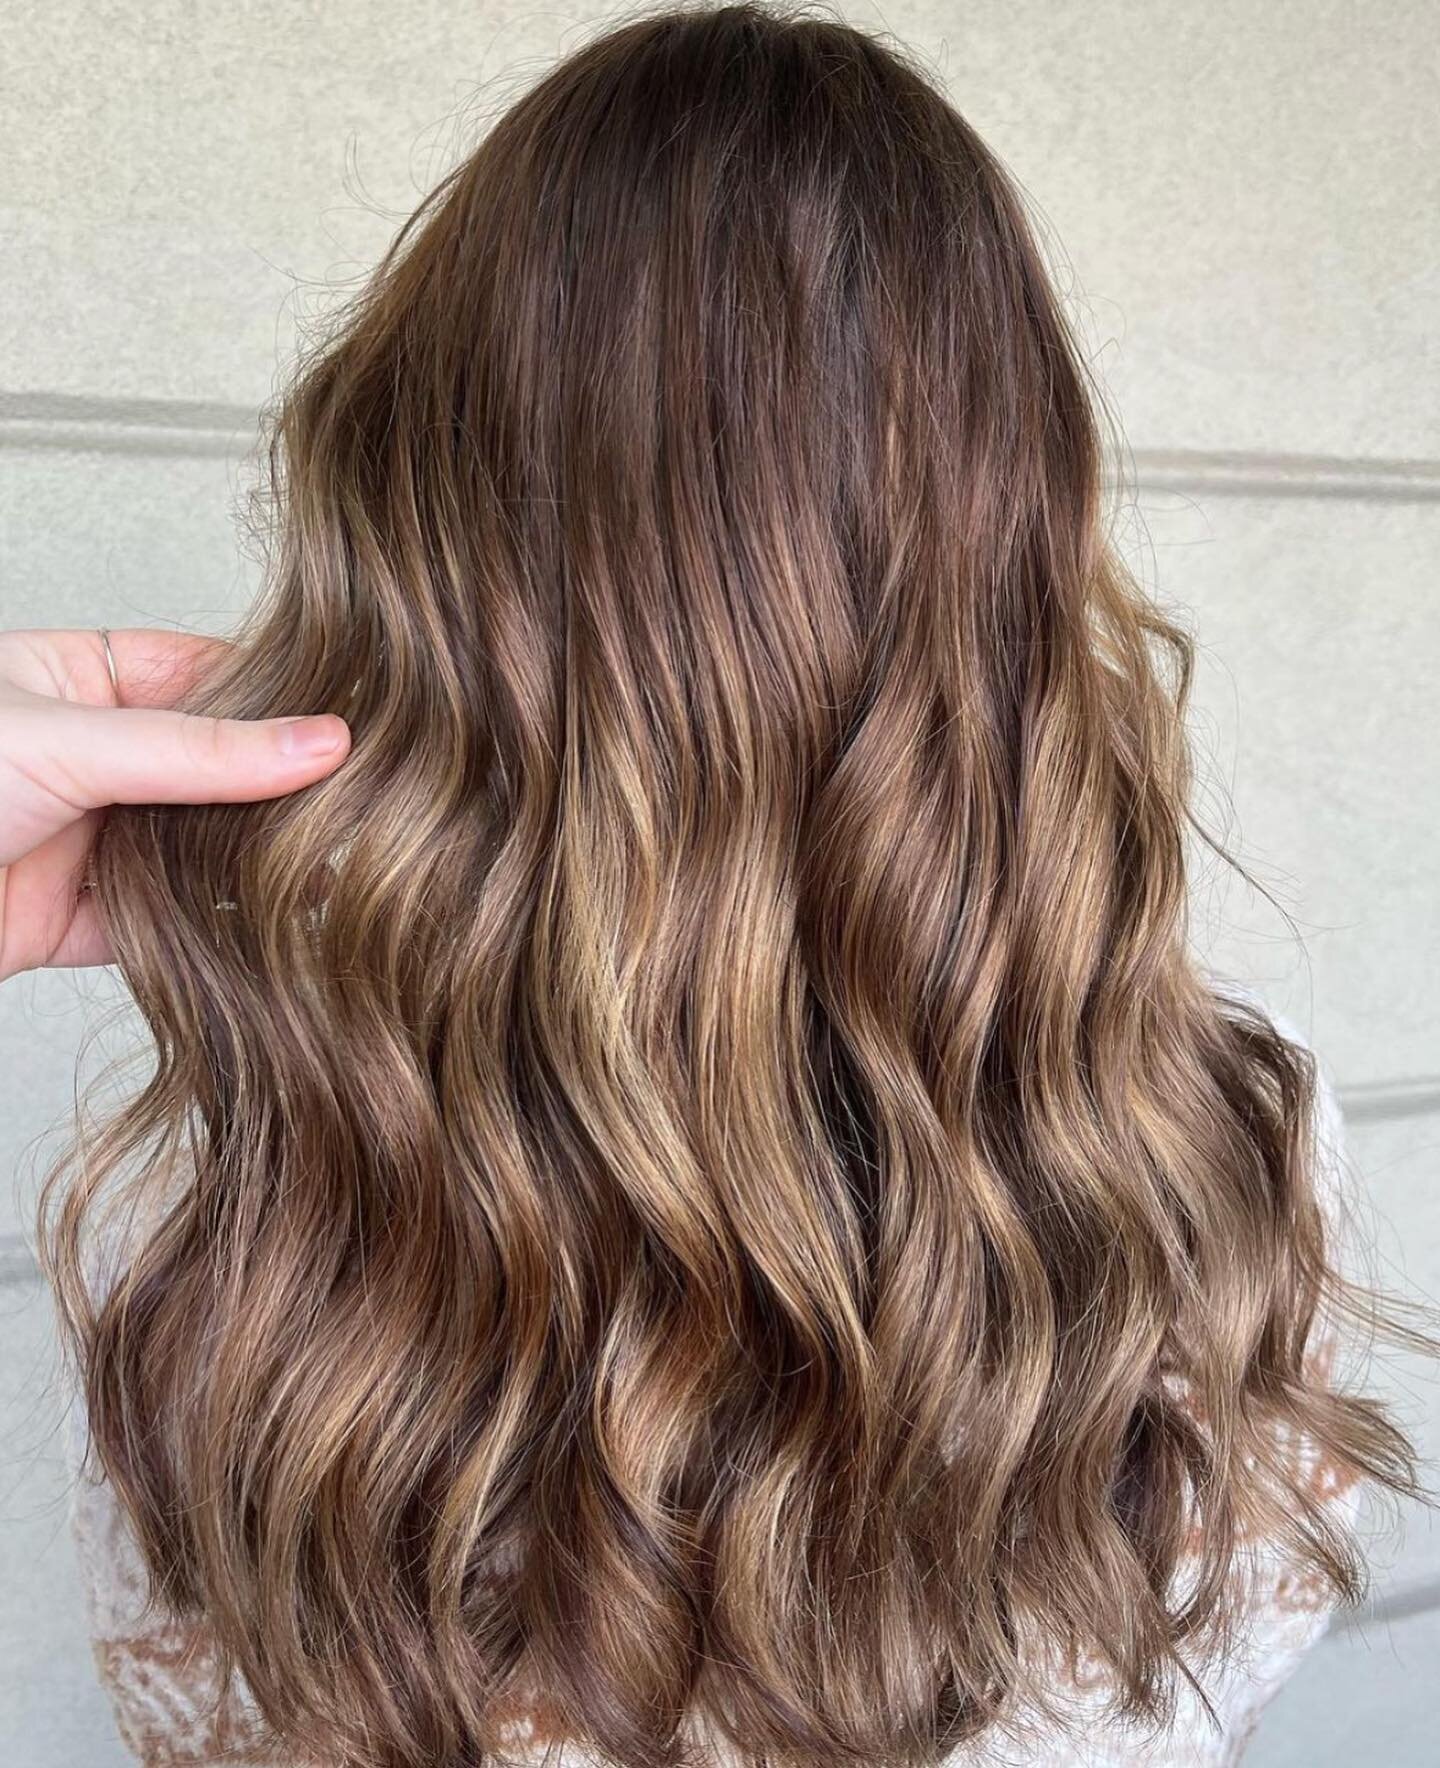 Beautiful balayage by @get.scissored 

She is accepting new clients! For booking go to staturesalon.com